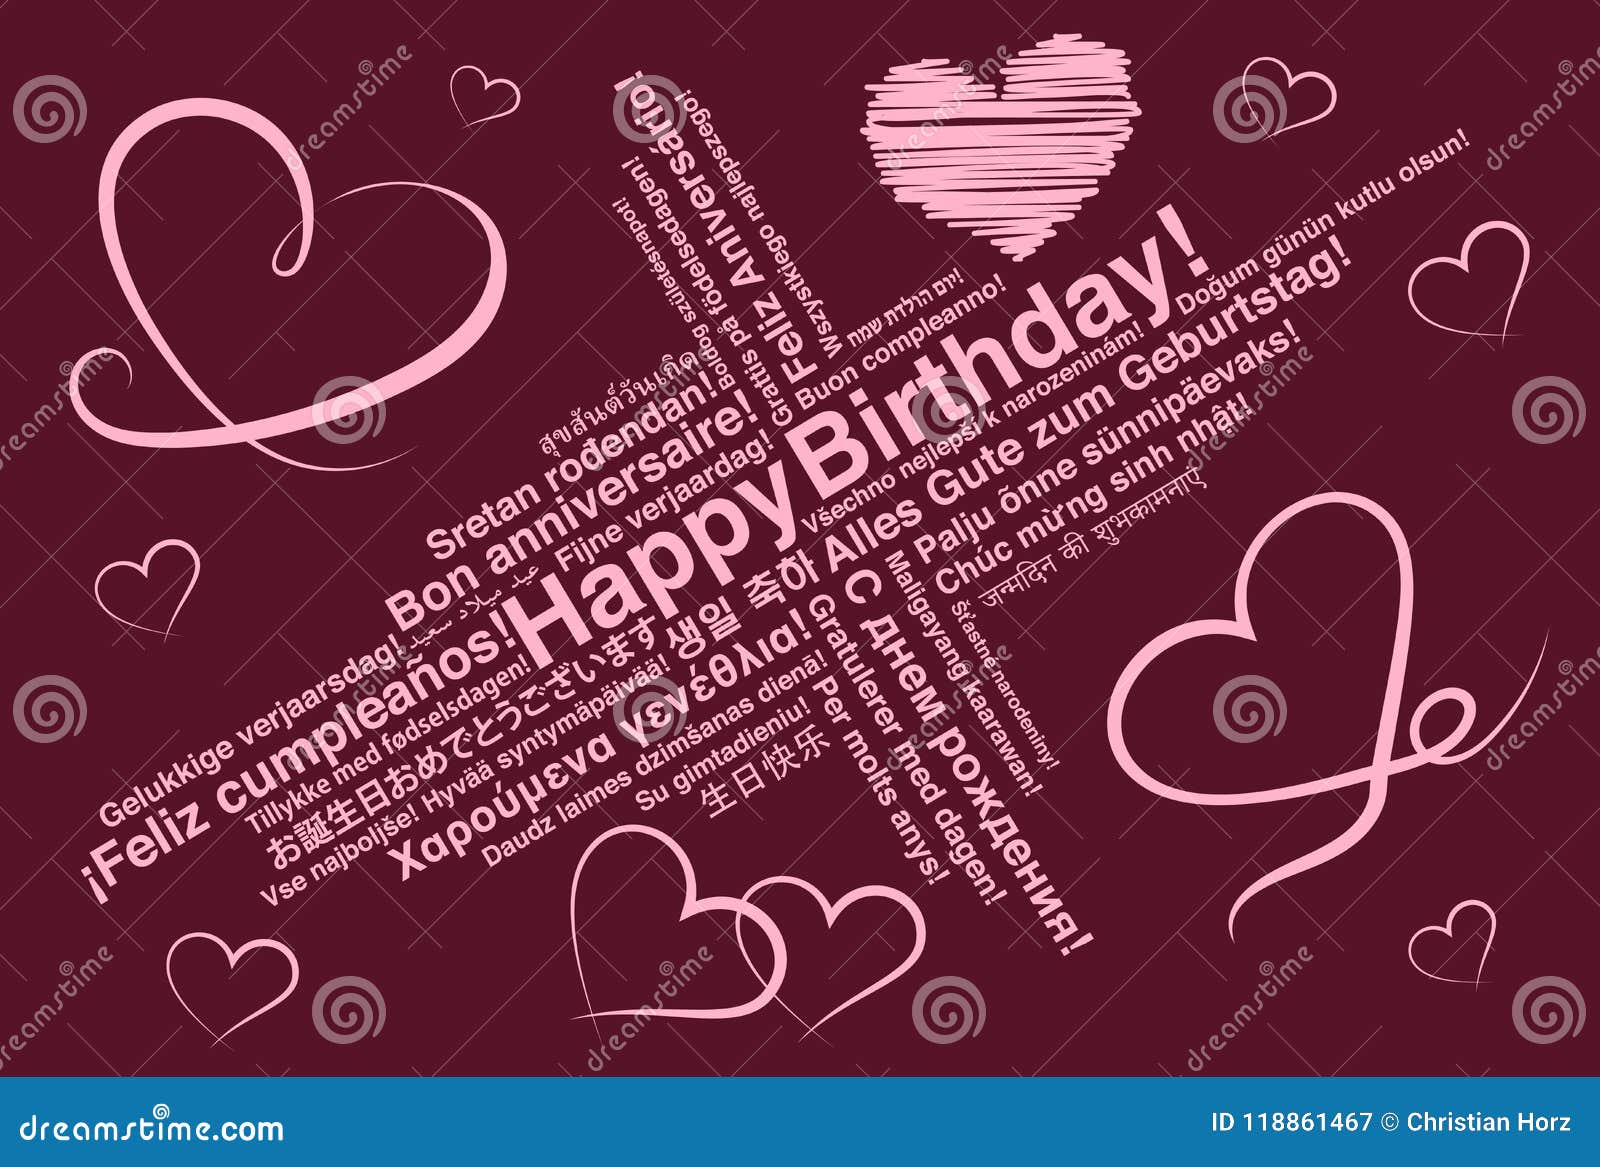 Happy Birthday In Different Languages Wordcloud Greeting Card With Heart Shapes Stock Vector Illustration Of Gift Happiness